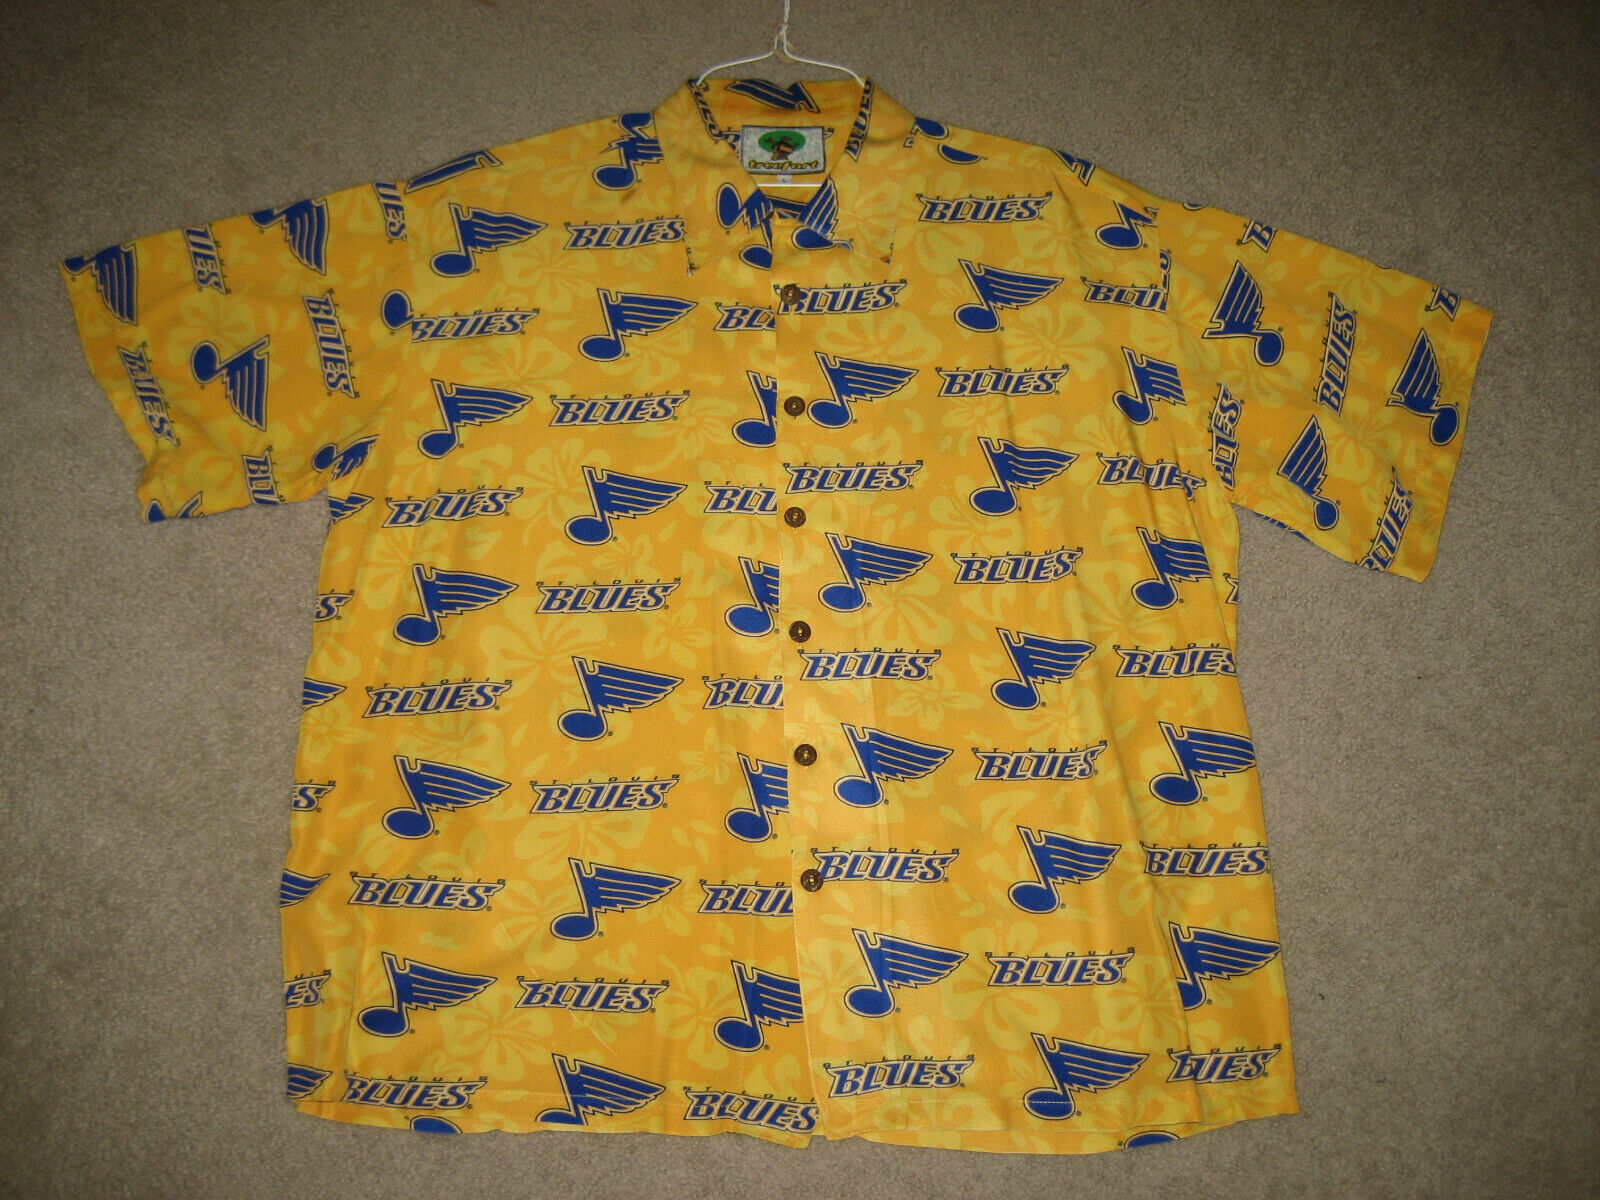 ST LOUIS BLUES Ranking integrated 1st place VINTAGE STYLE LOGO HAWAIIAN New product!! S CLASSIC SHIRT